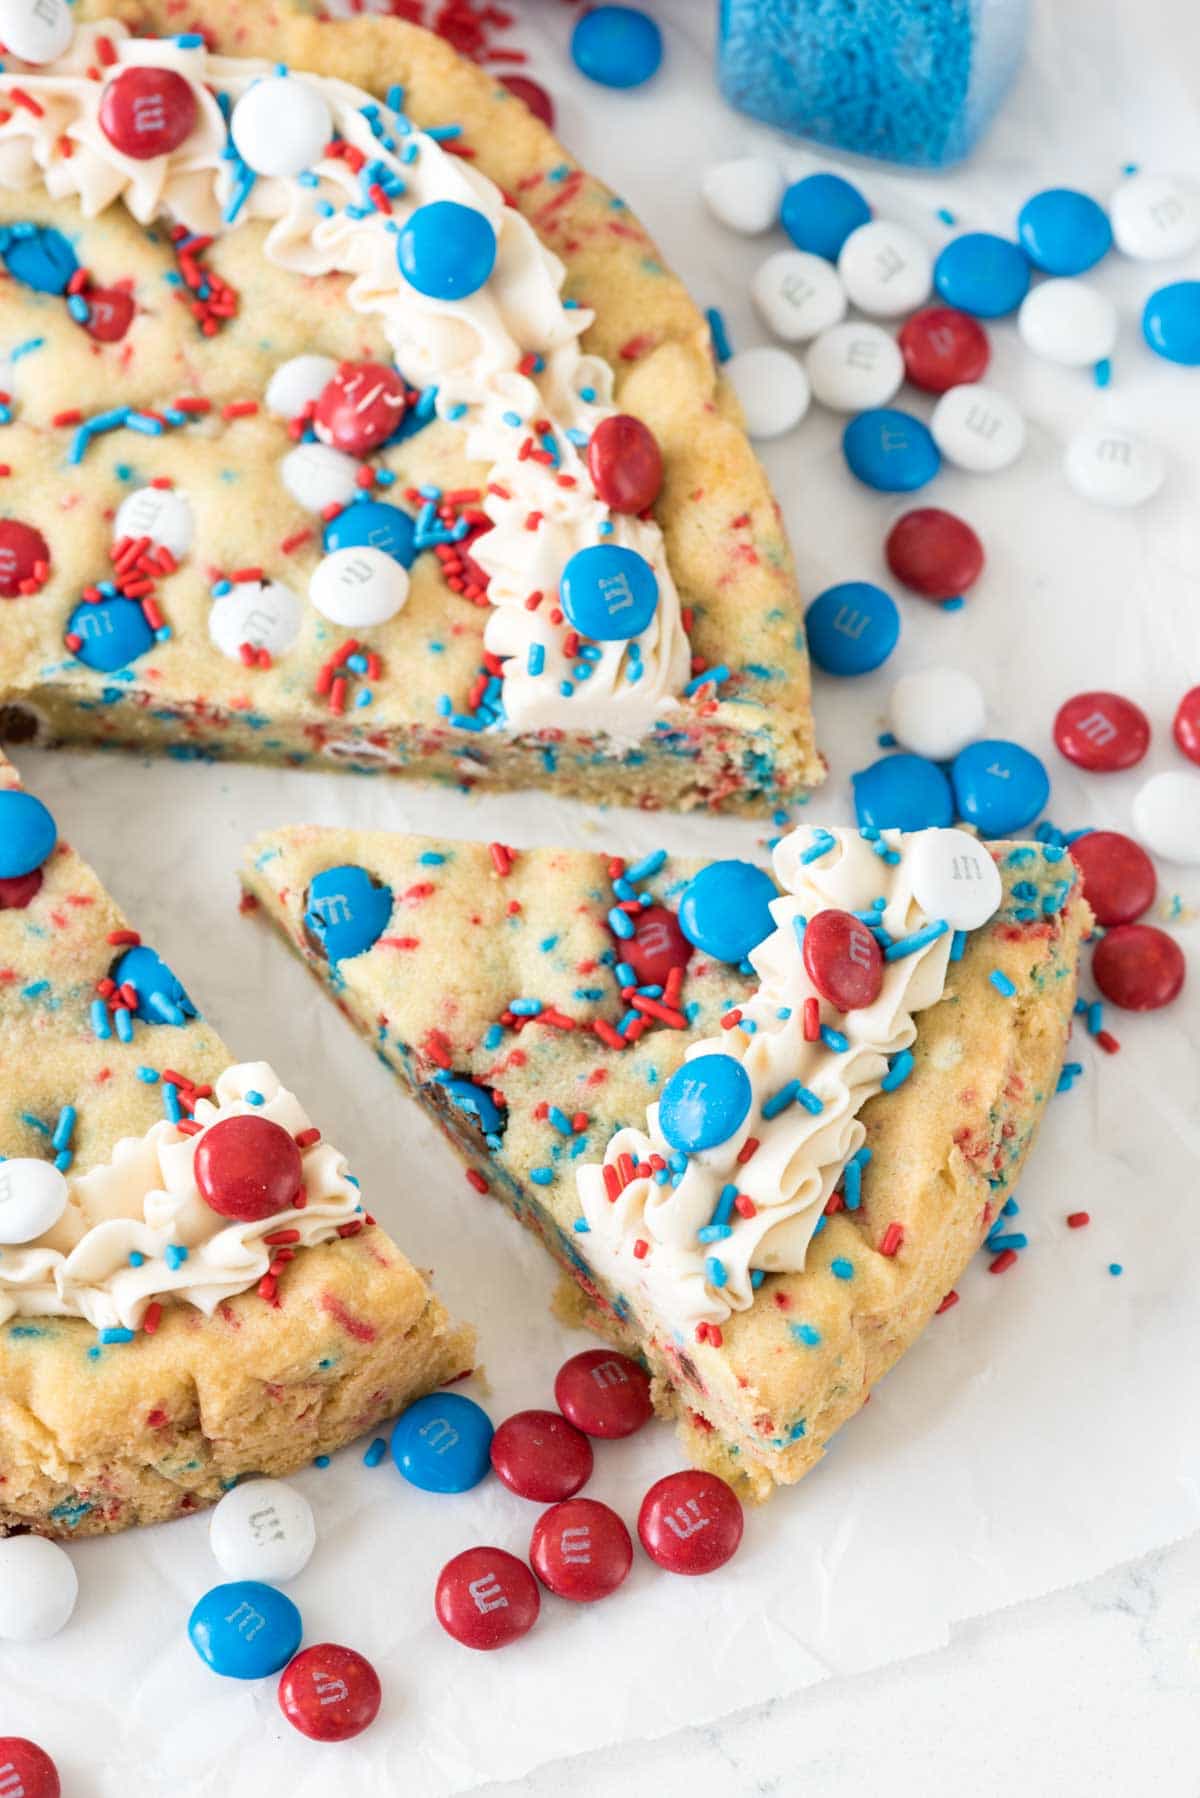 Fireworks Cookie Cake 5 of 7